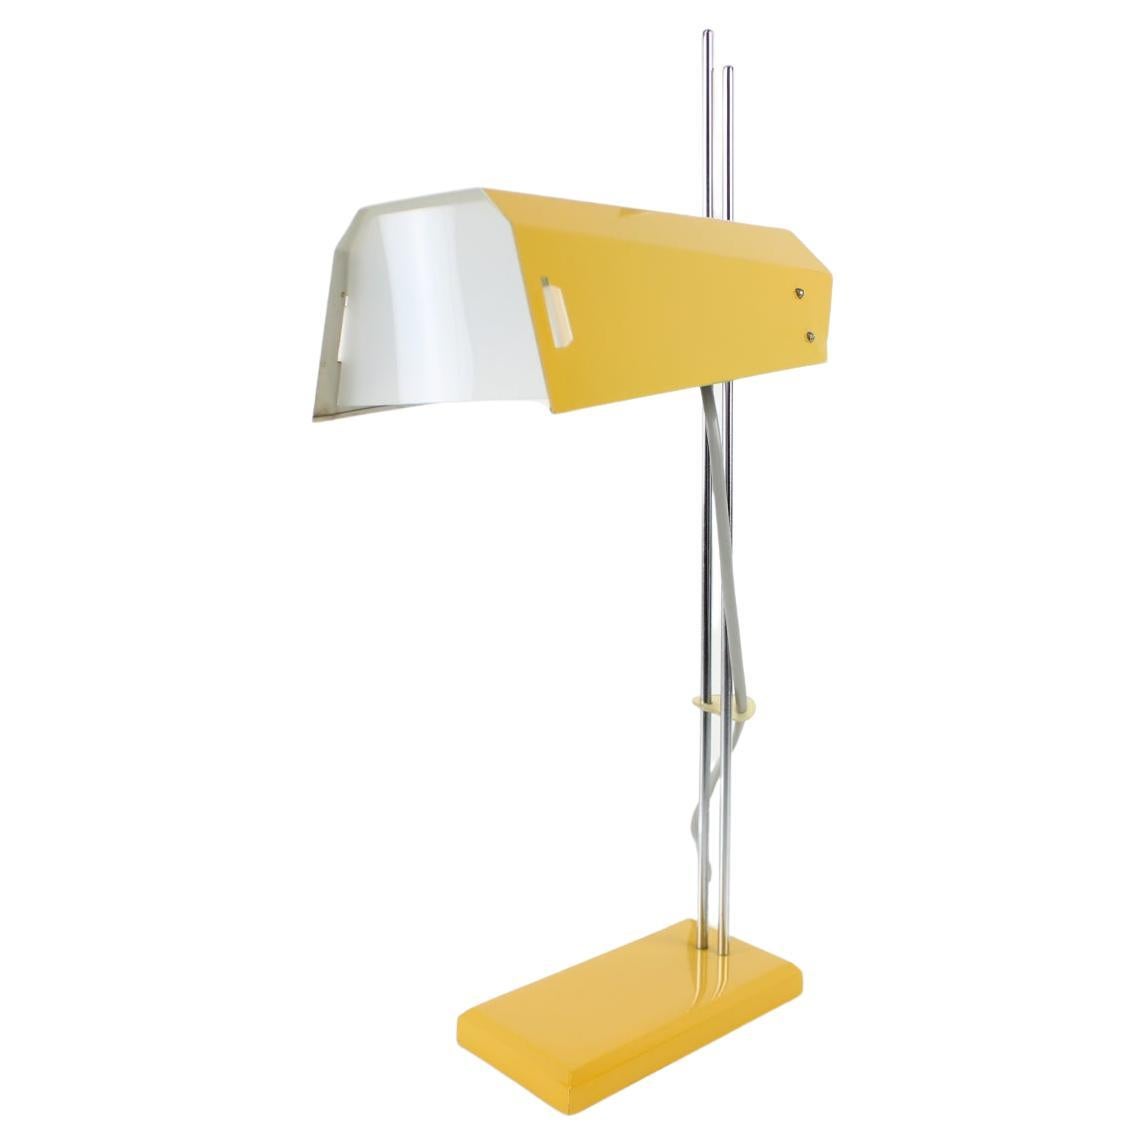 Midcentury Adjustable Table Lamp by Lidokov, 1970s